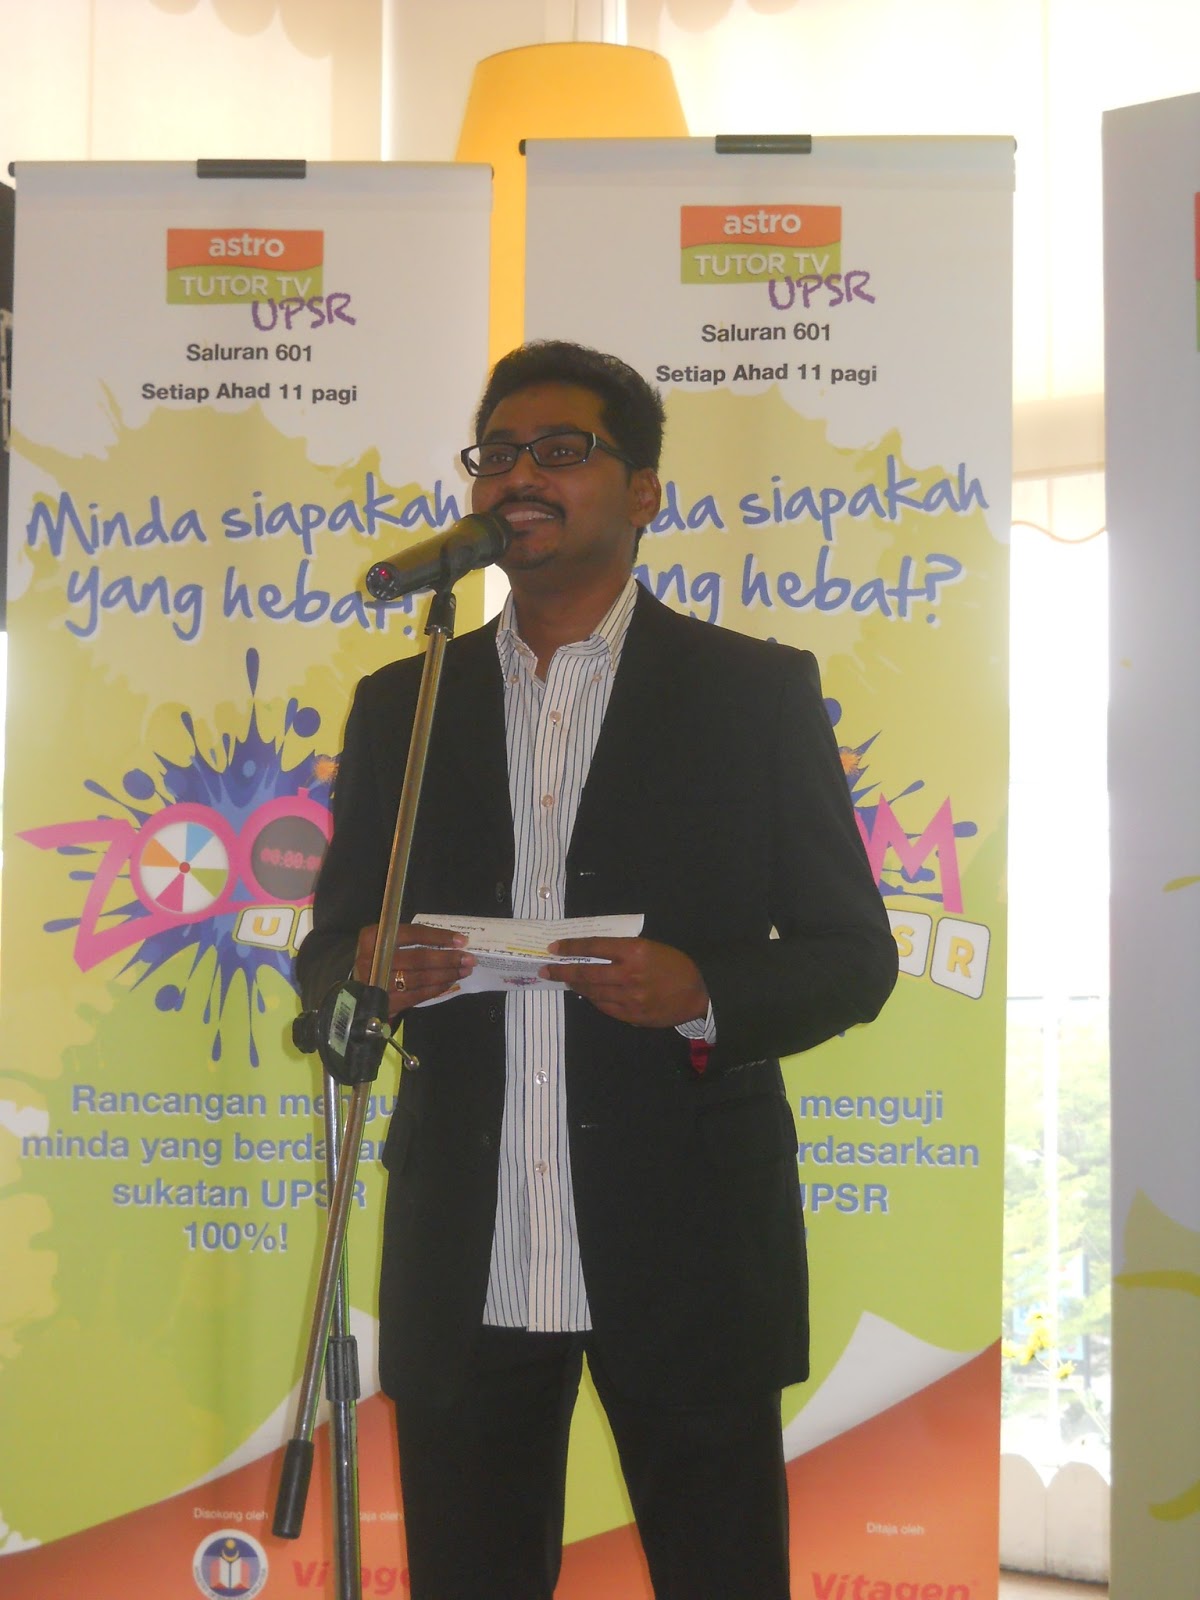 KEVIN MEETS THE STARS: ASTRO TUTOR TV UPSR LAUNCHES ZOOM UPSR!